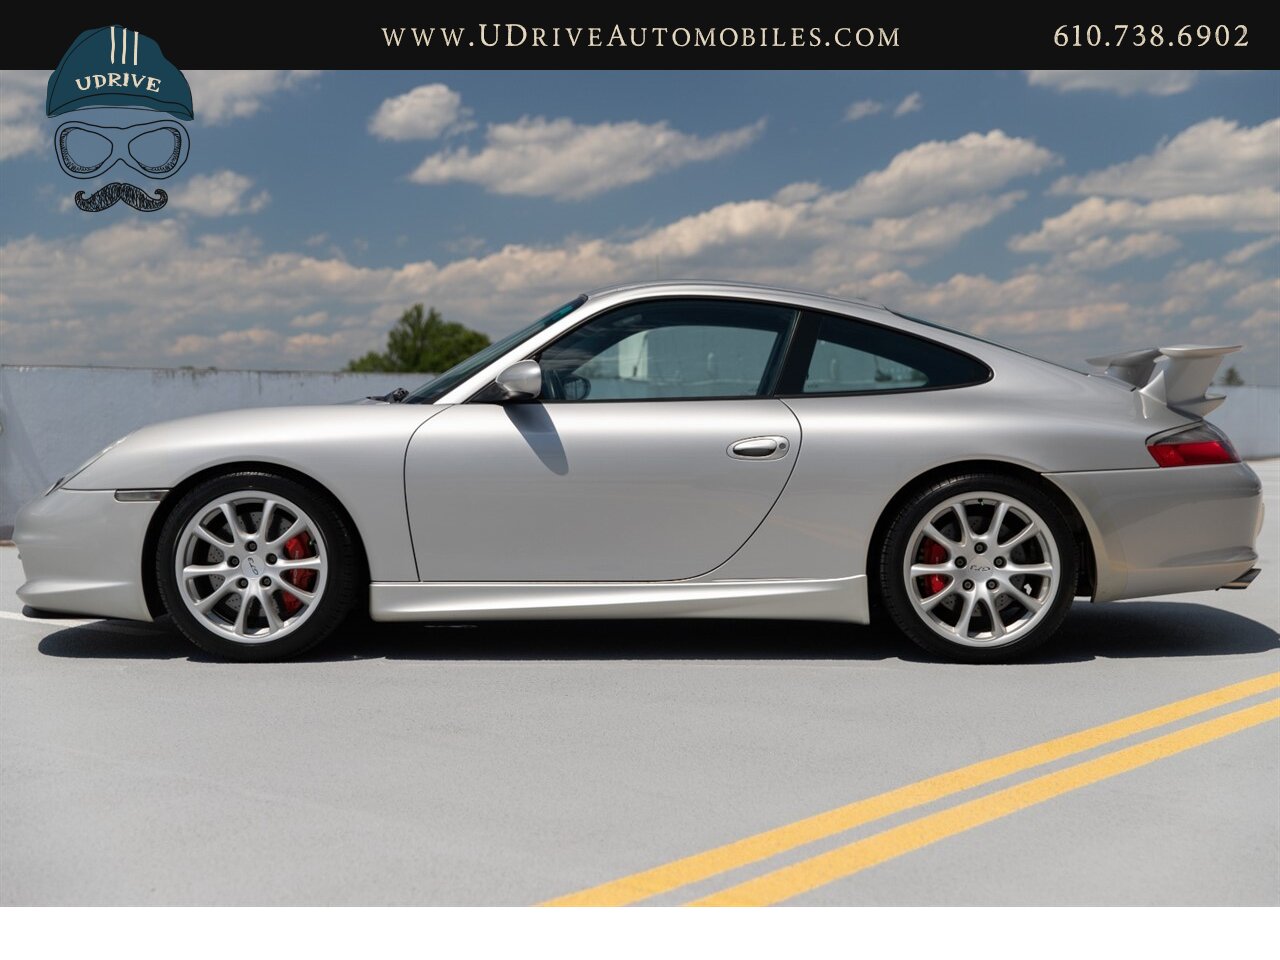 2004 Porsche 911 GT3 18k Miles Sport Seats Painted Hardback Seats  Thicker Steering Wheel Xenon Headlamps - Photo 9 - West Chester, PA 19382